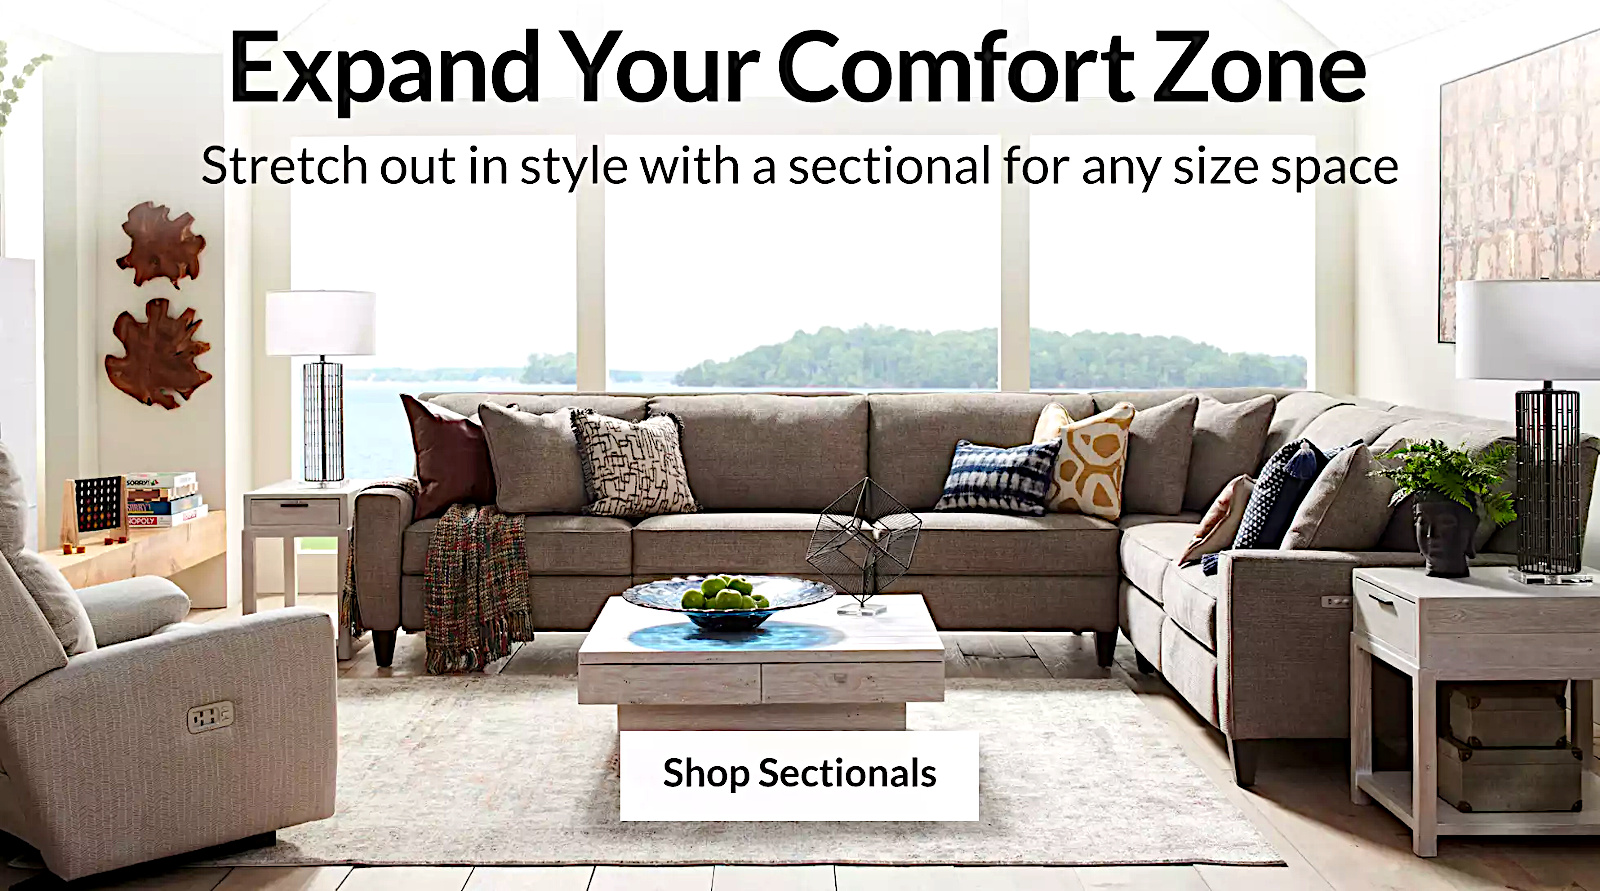 Expand your comfort zone sale